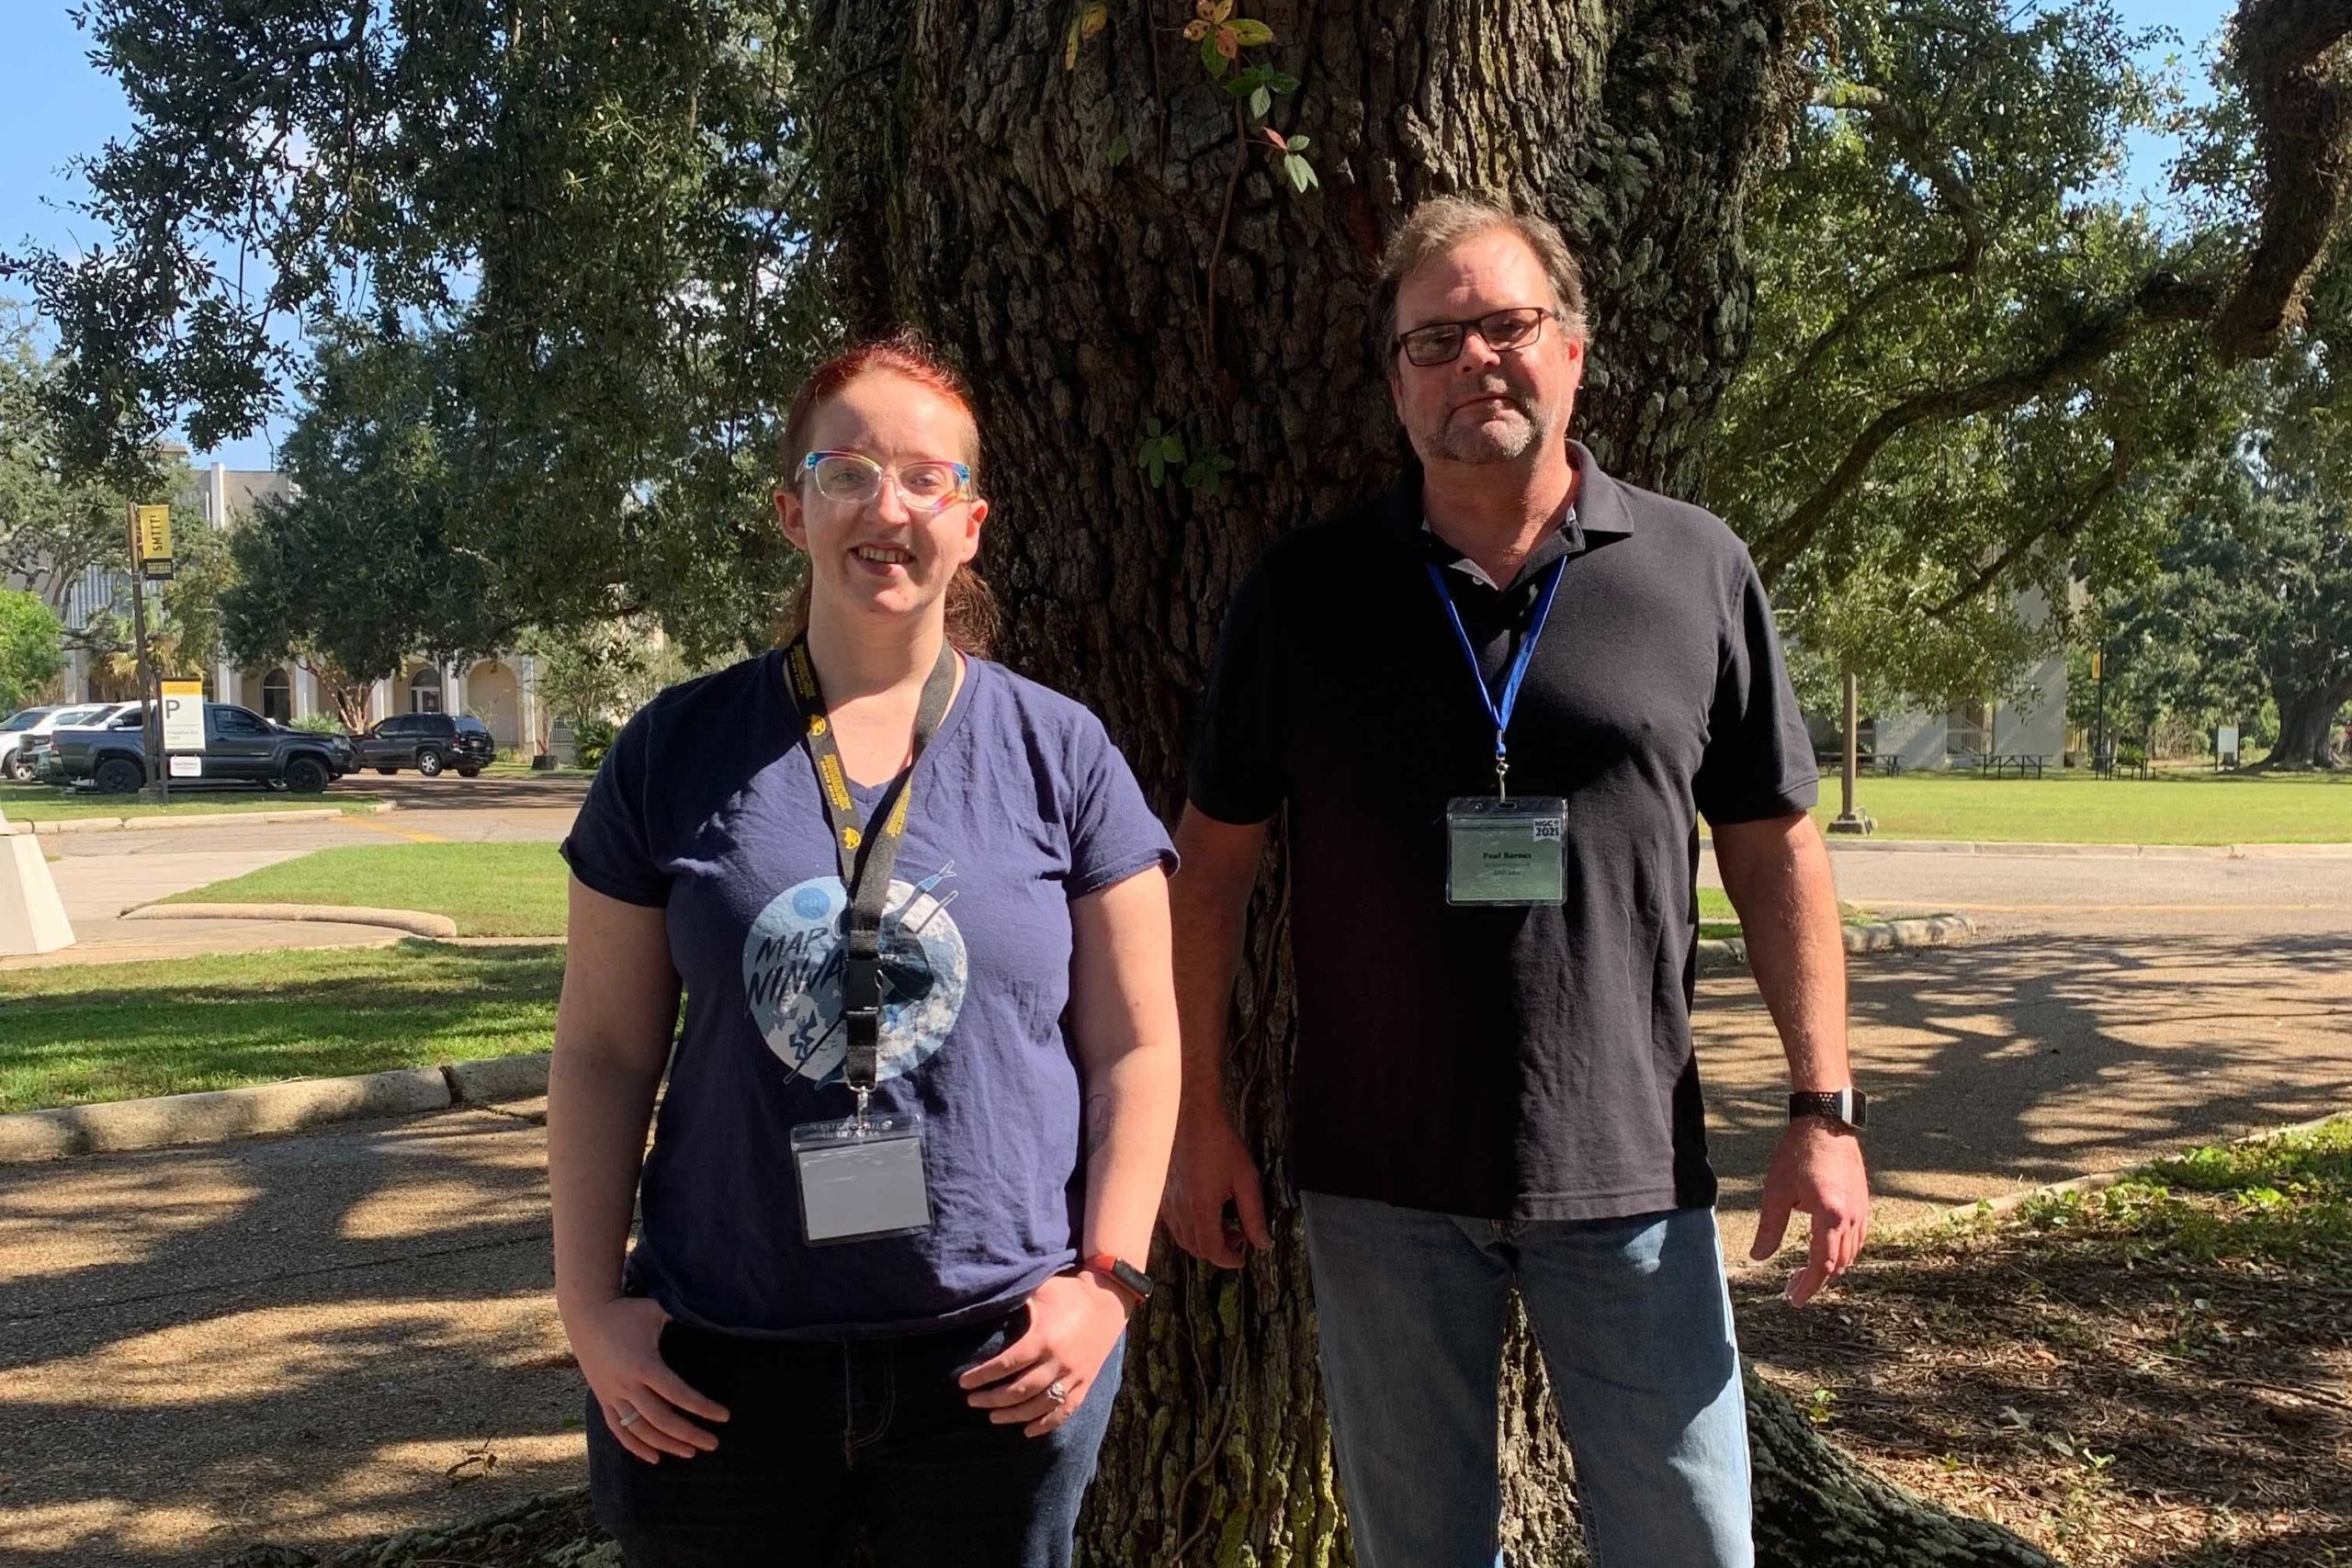 Courtney Menikheim and Paul Barnes stand before an oak tree at the University of Southern Mississippi Gulf Park campus. They are both facing the camera and smiling.